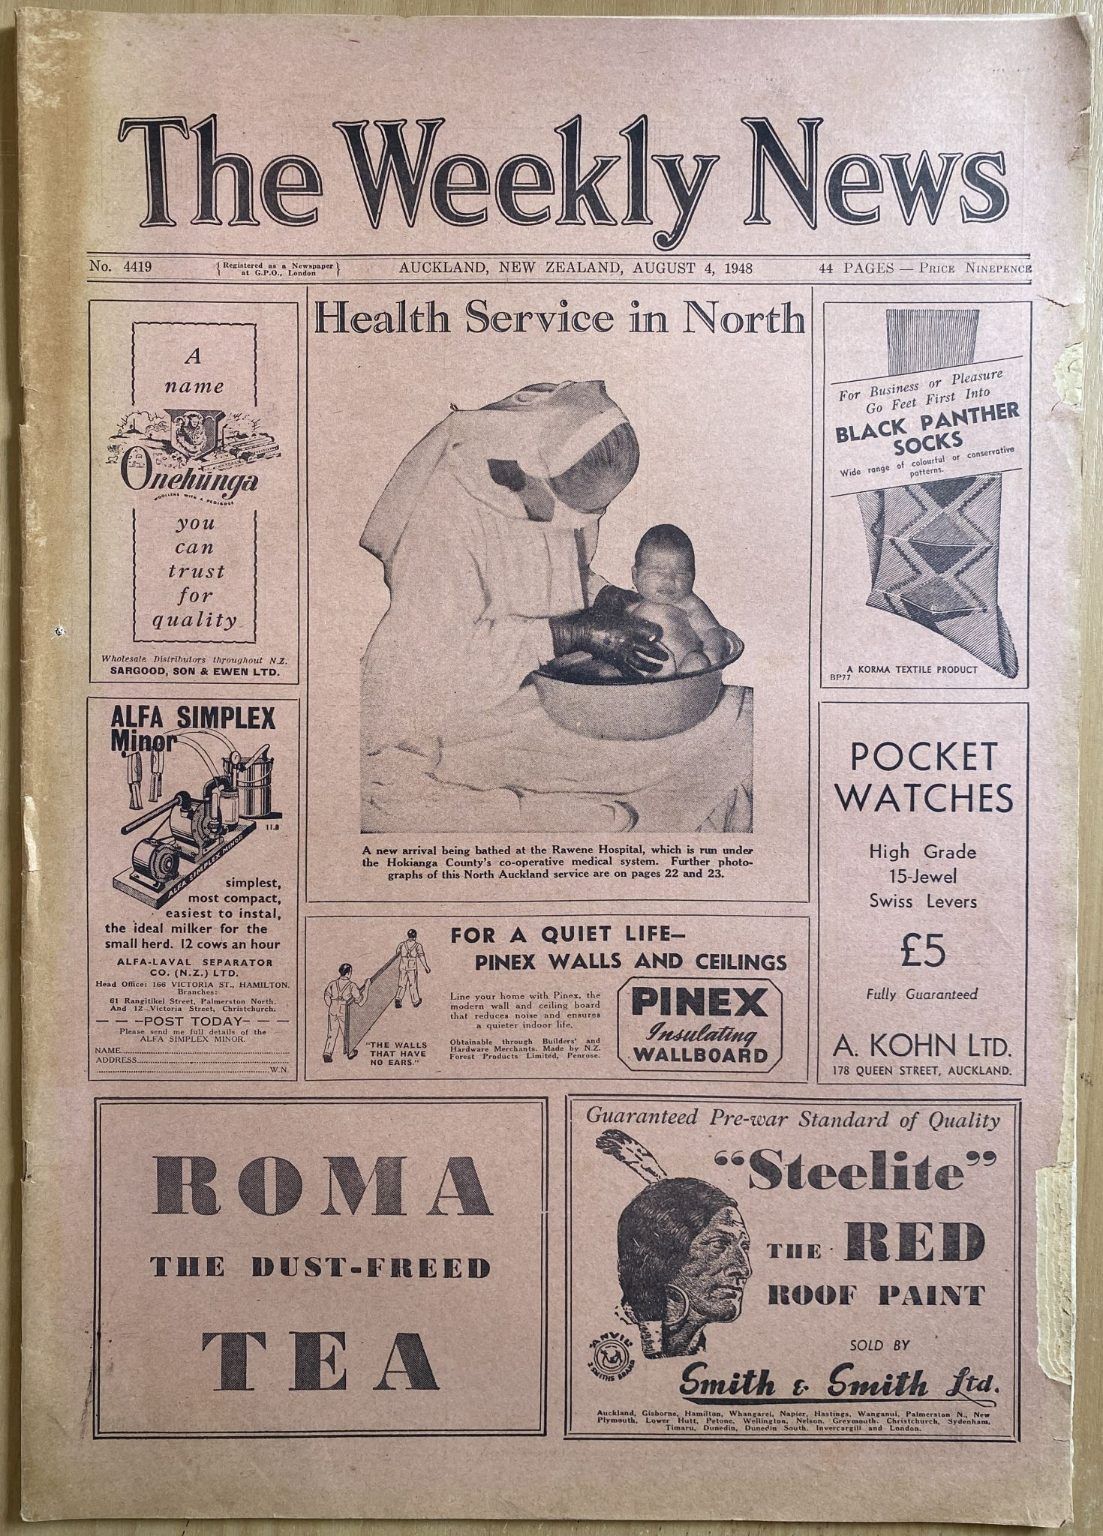 OLD NEWSPAPER: The Weekly News - No. 4419, 4 August 1948